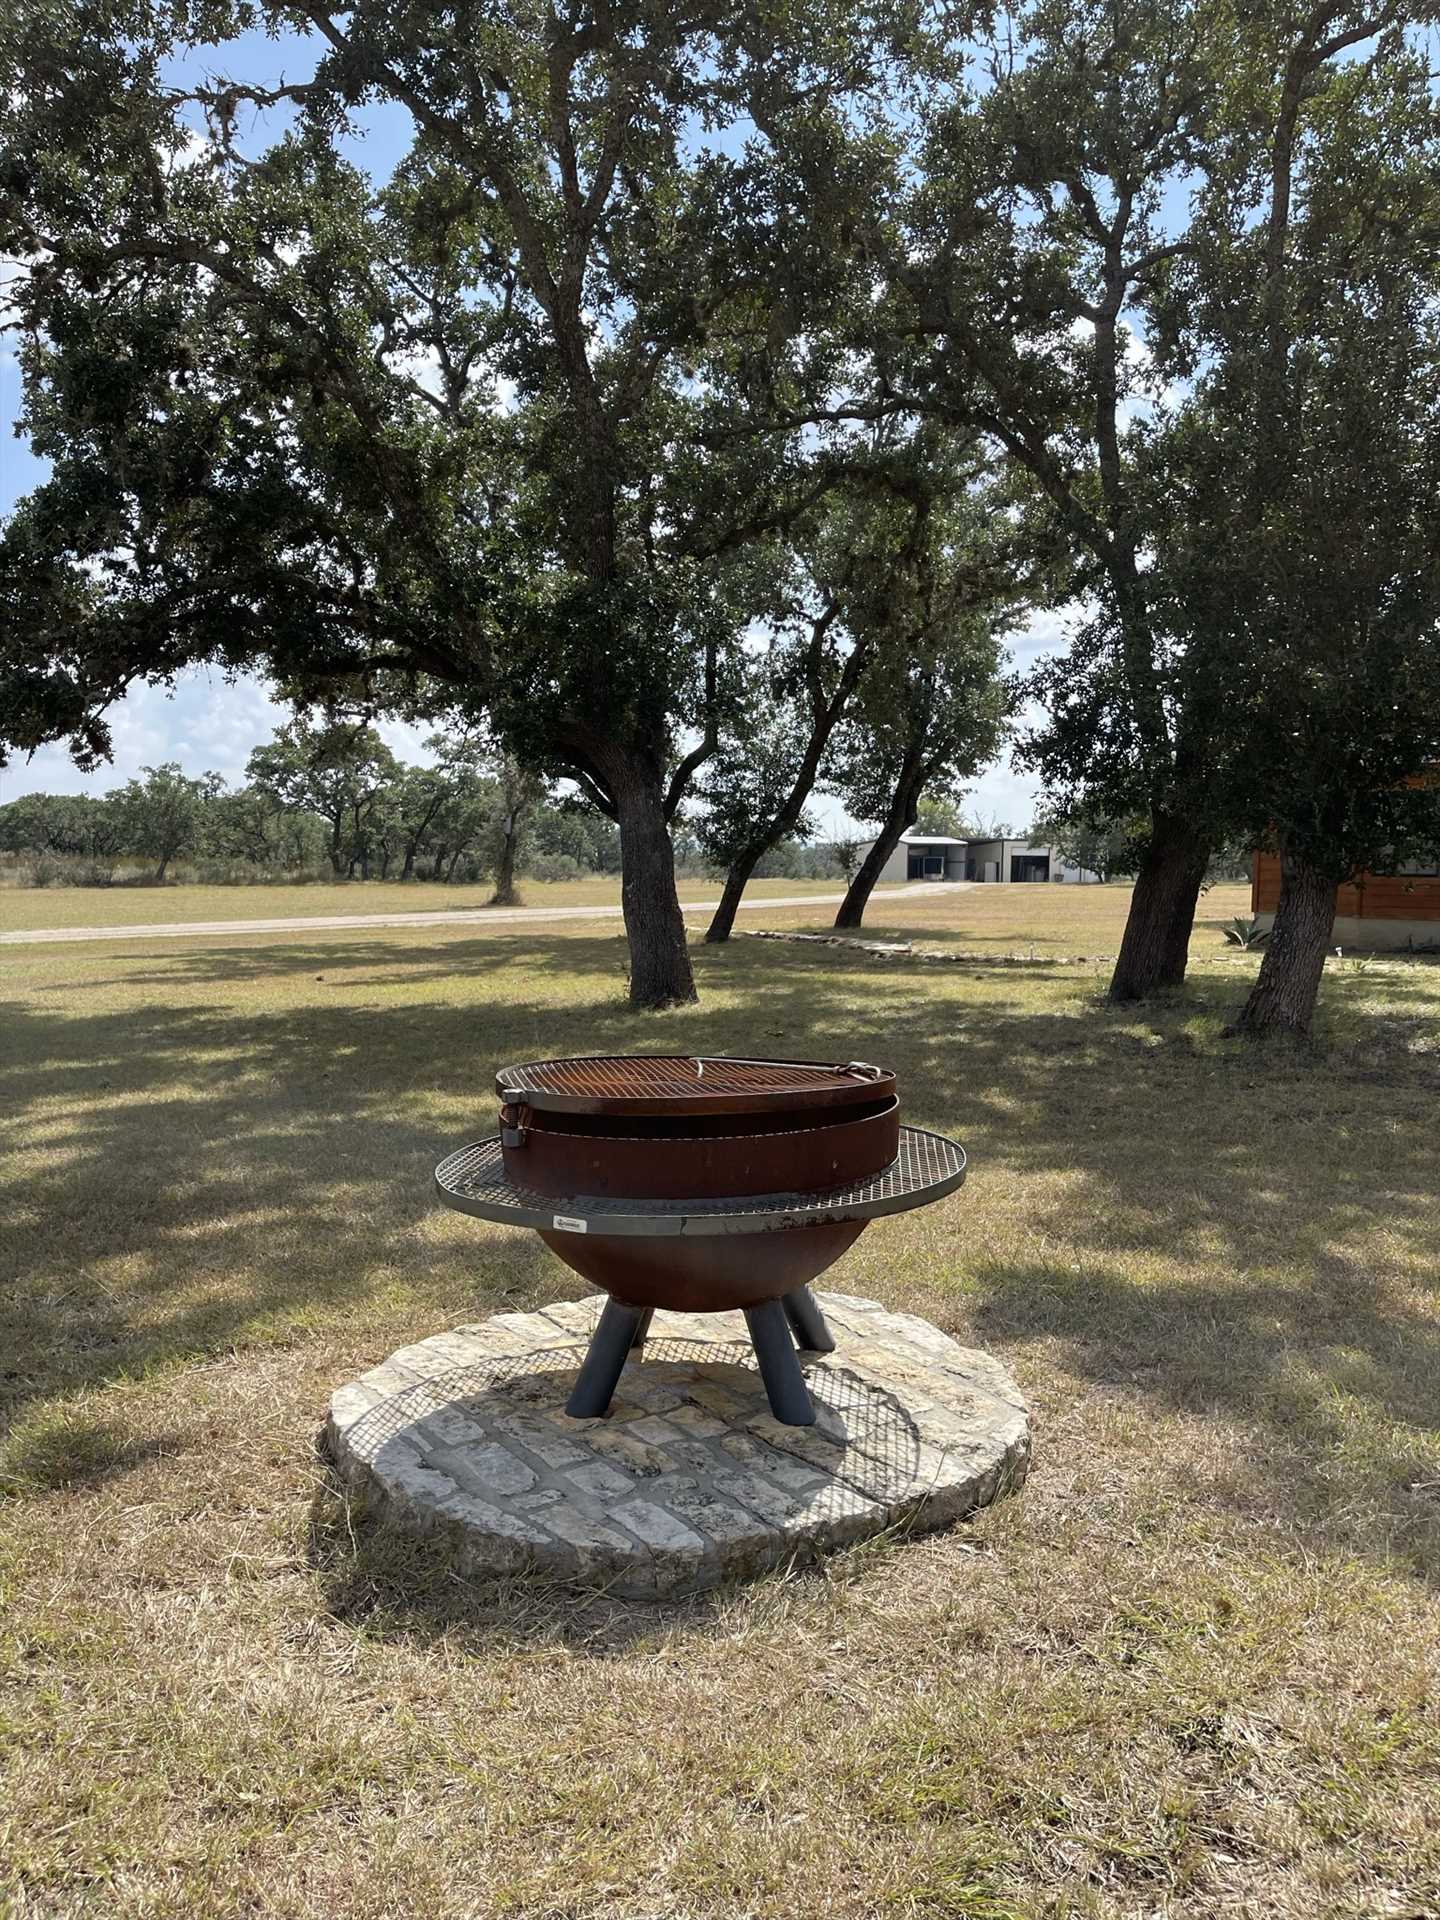                                                 Roast up a snack around the fire pit...and complimentary firewood is included in your stay at Bandera Ridge!